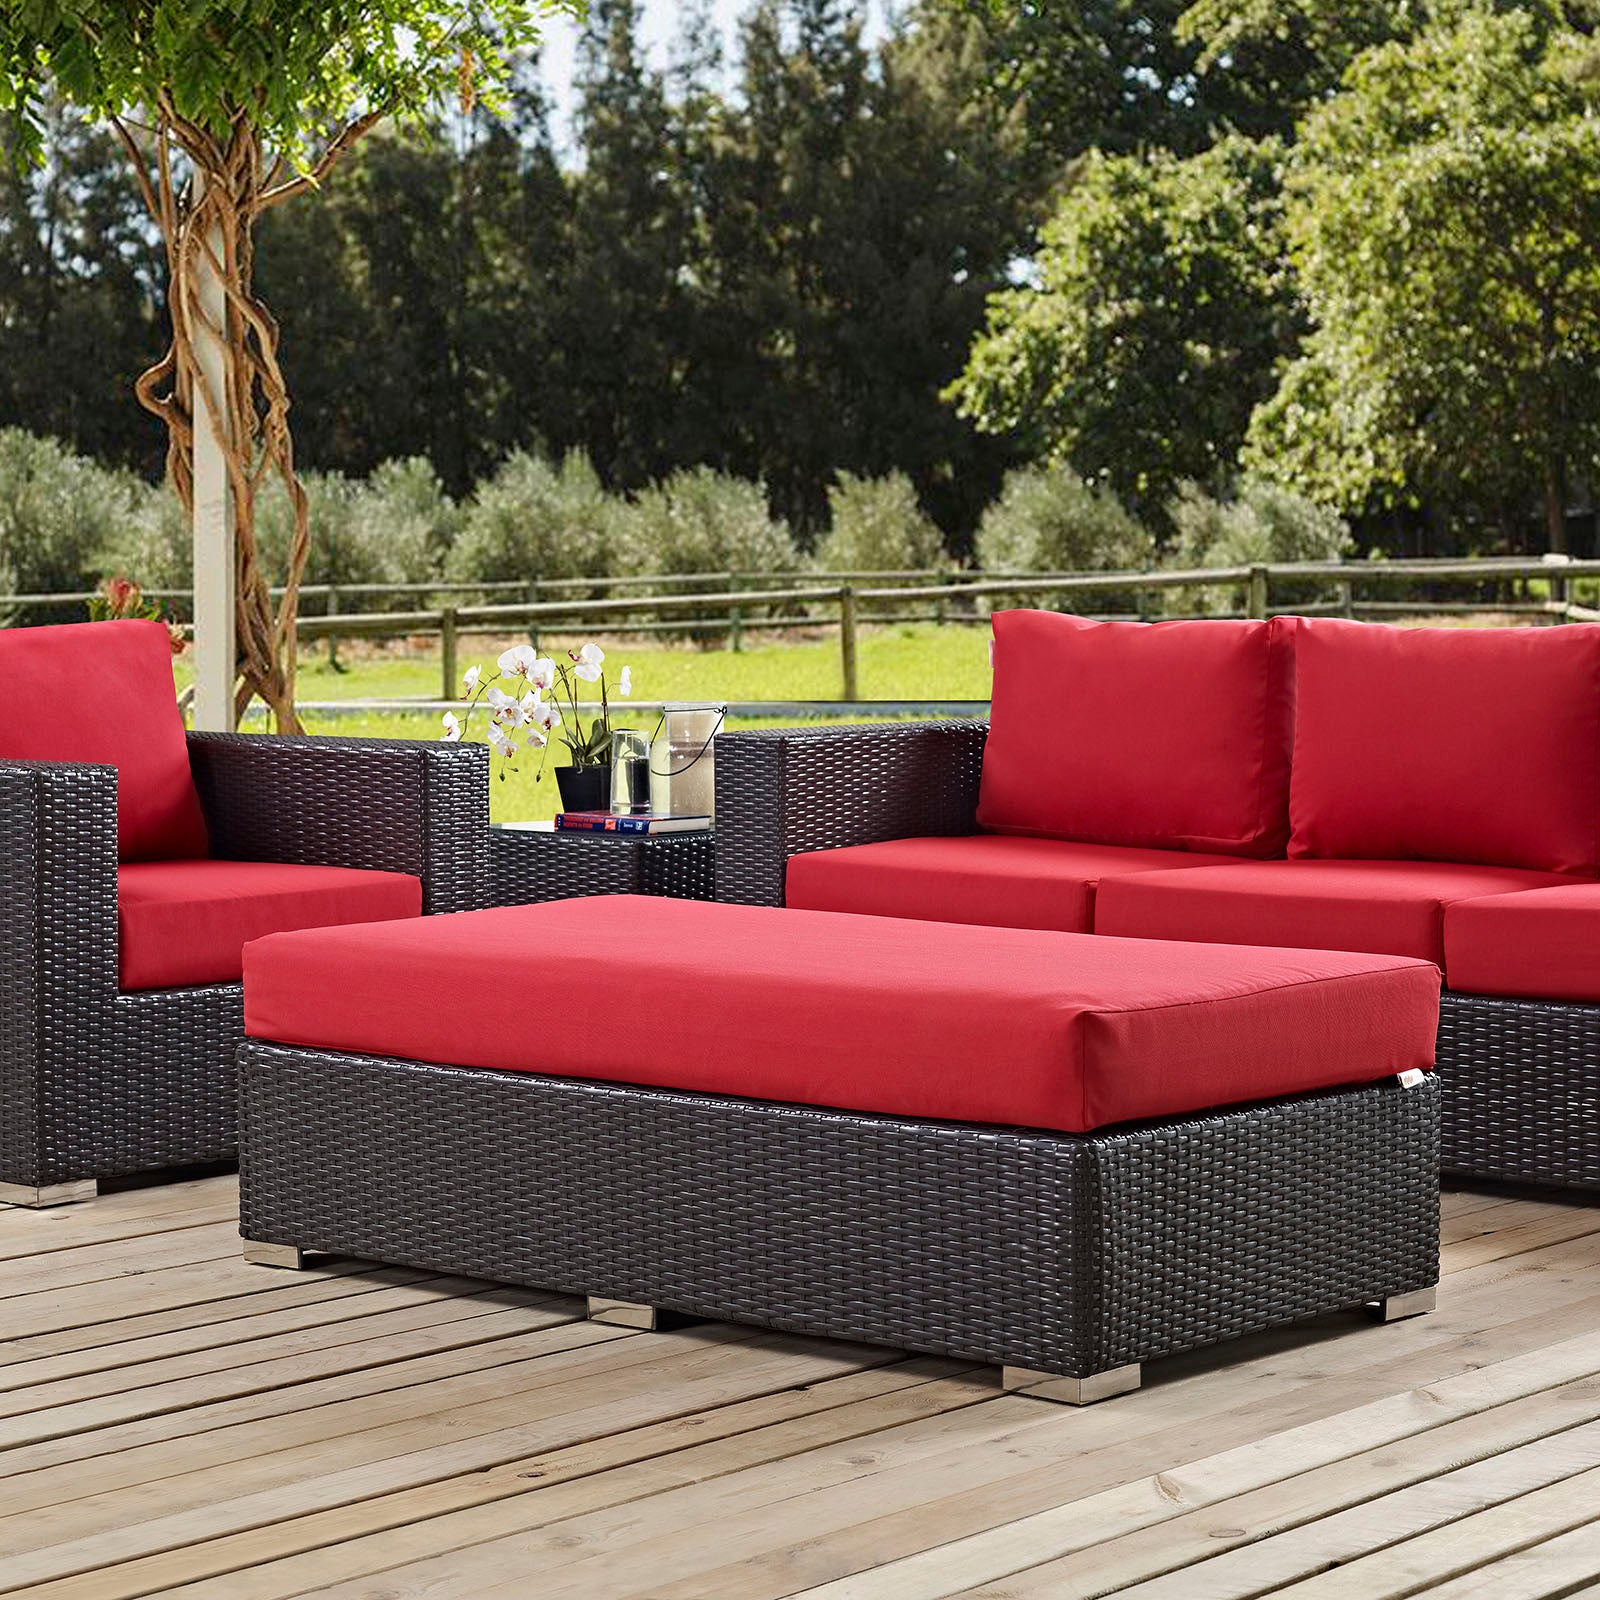 Modway Outdoor Stools & Benches - Convene Outdoor Patio Fabric Rectangle Ottoman Espresso Red